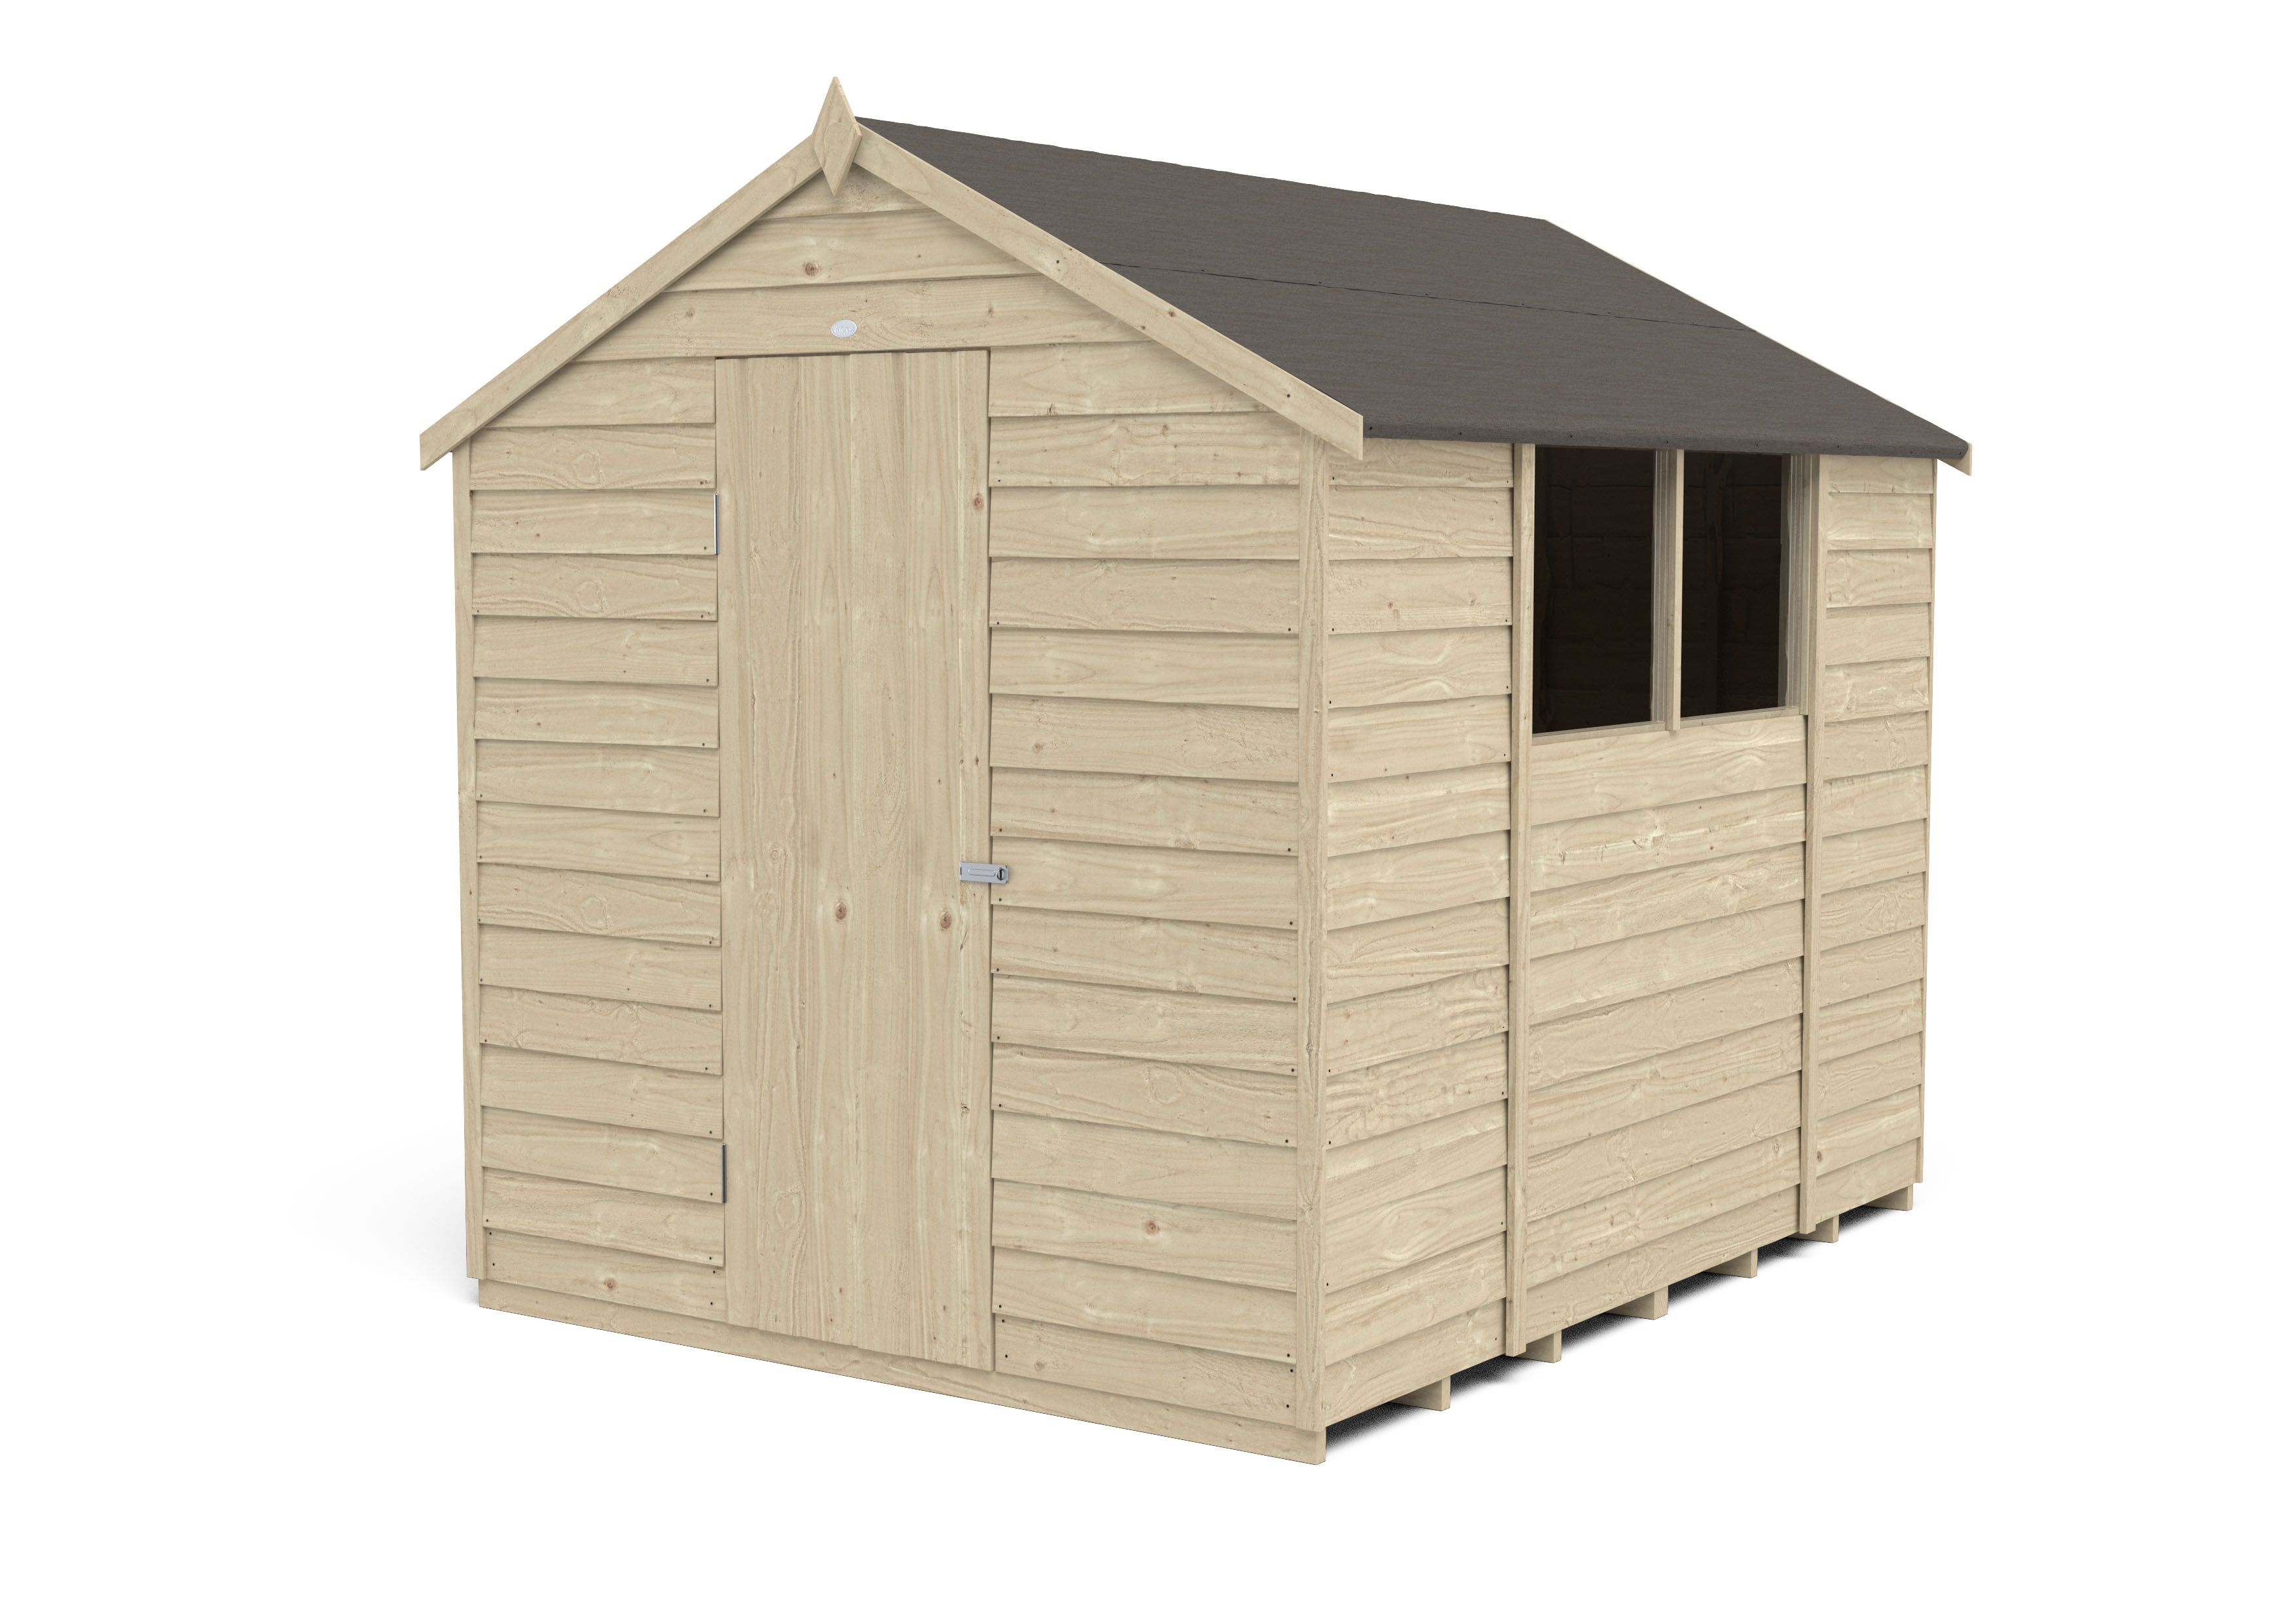 Forest Garden Overlap 8x6 ft Apex Wooden Pressure treated Shed with floor & 2 windows